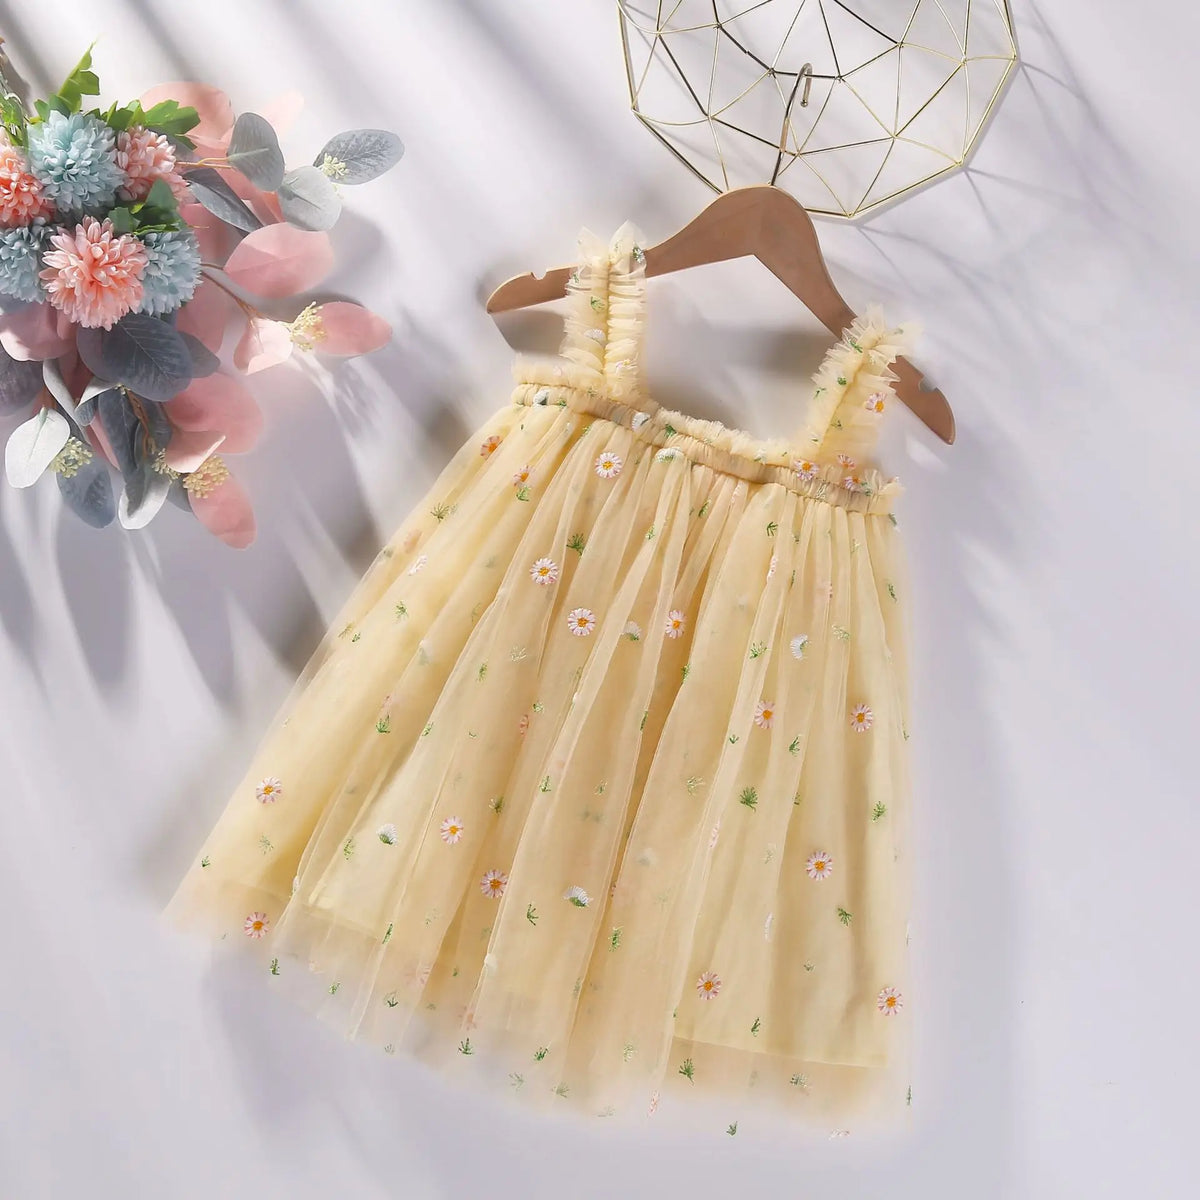 Daisy Embroidered Dress